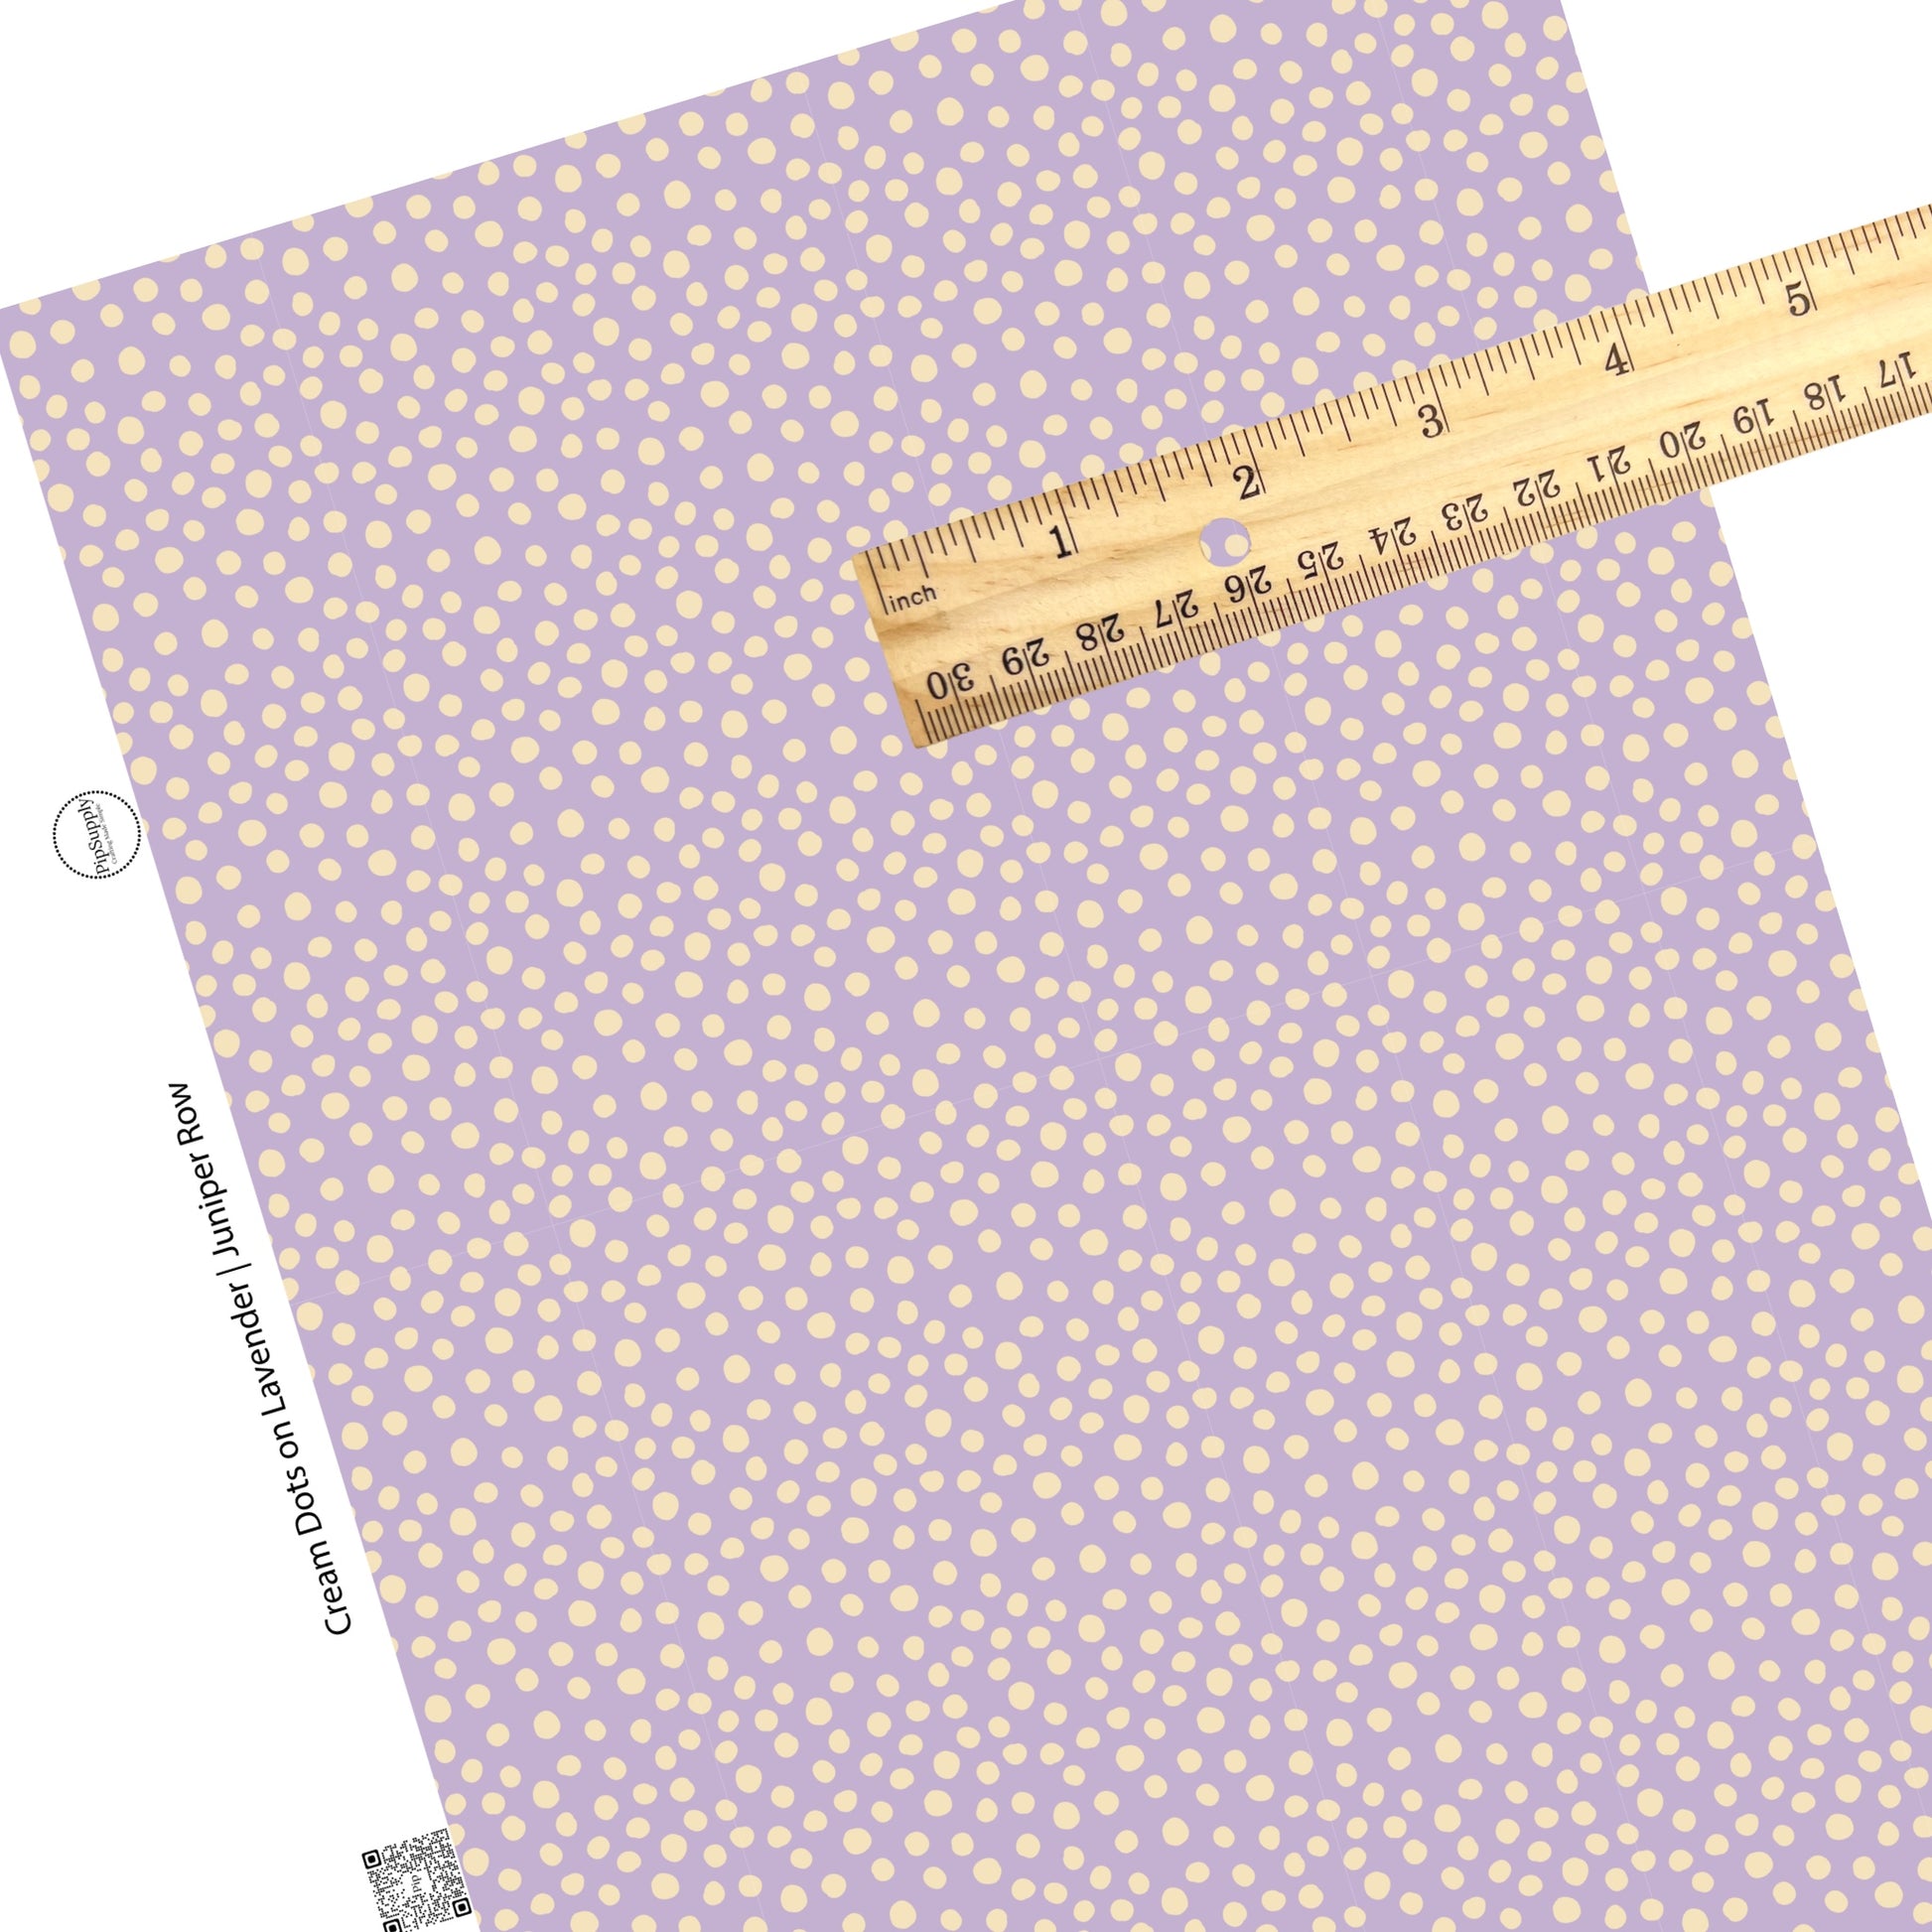 These dot themed pastel purple faux leather sheets contain the following design elements: small cream dots scattered on light purple.